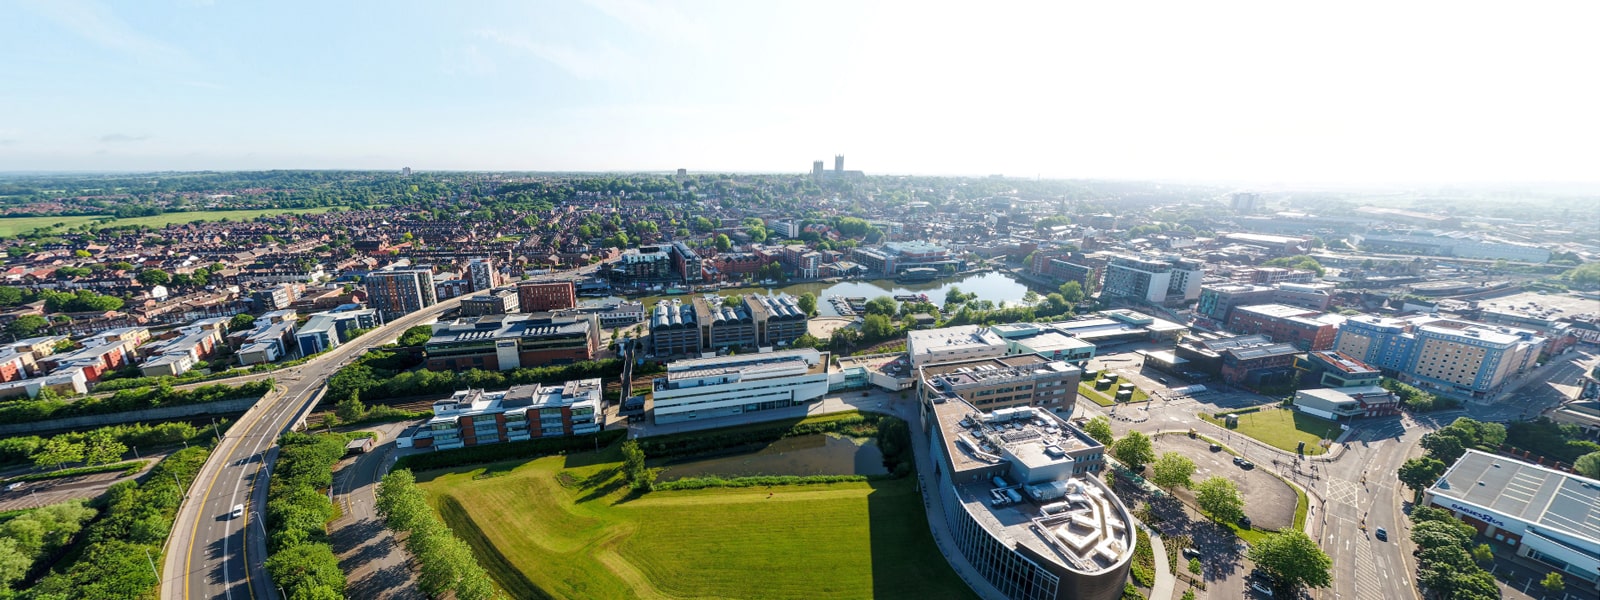 University of Lincoln Brayford Campus from Air